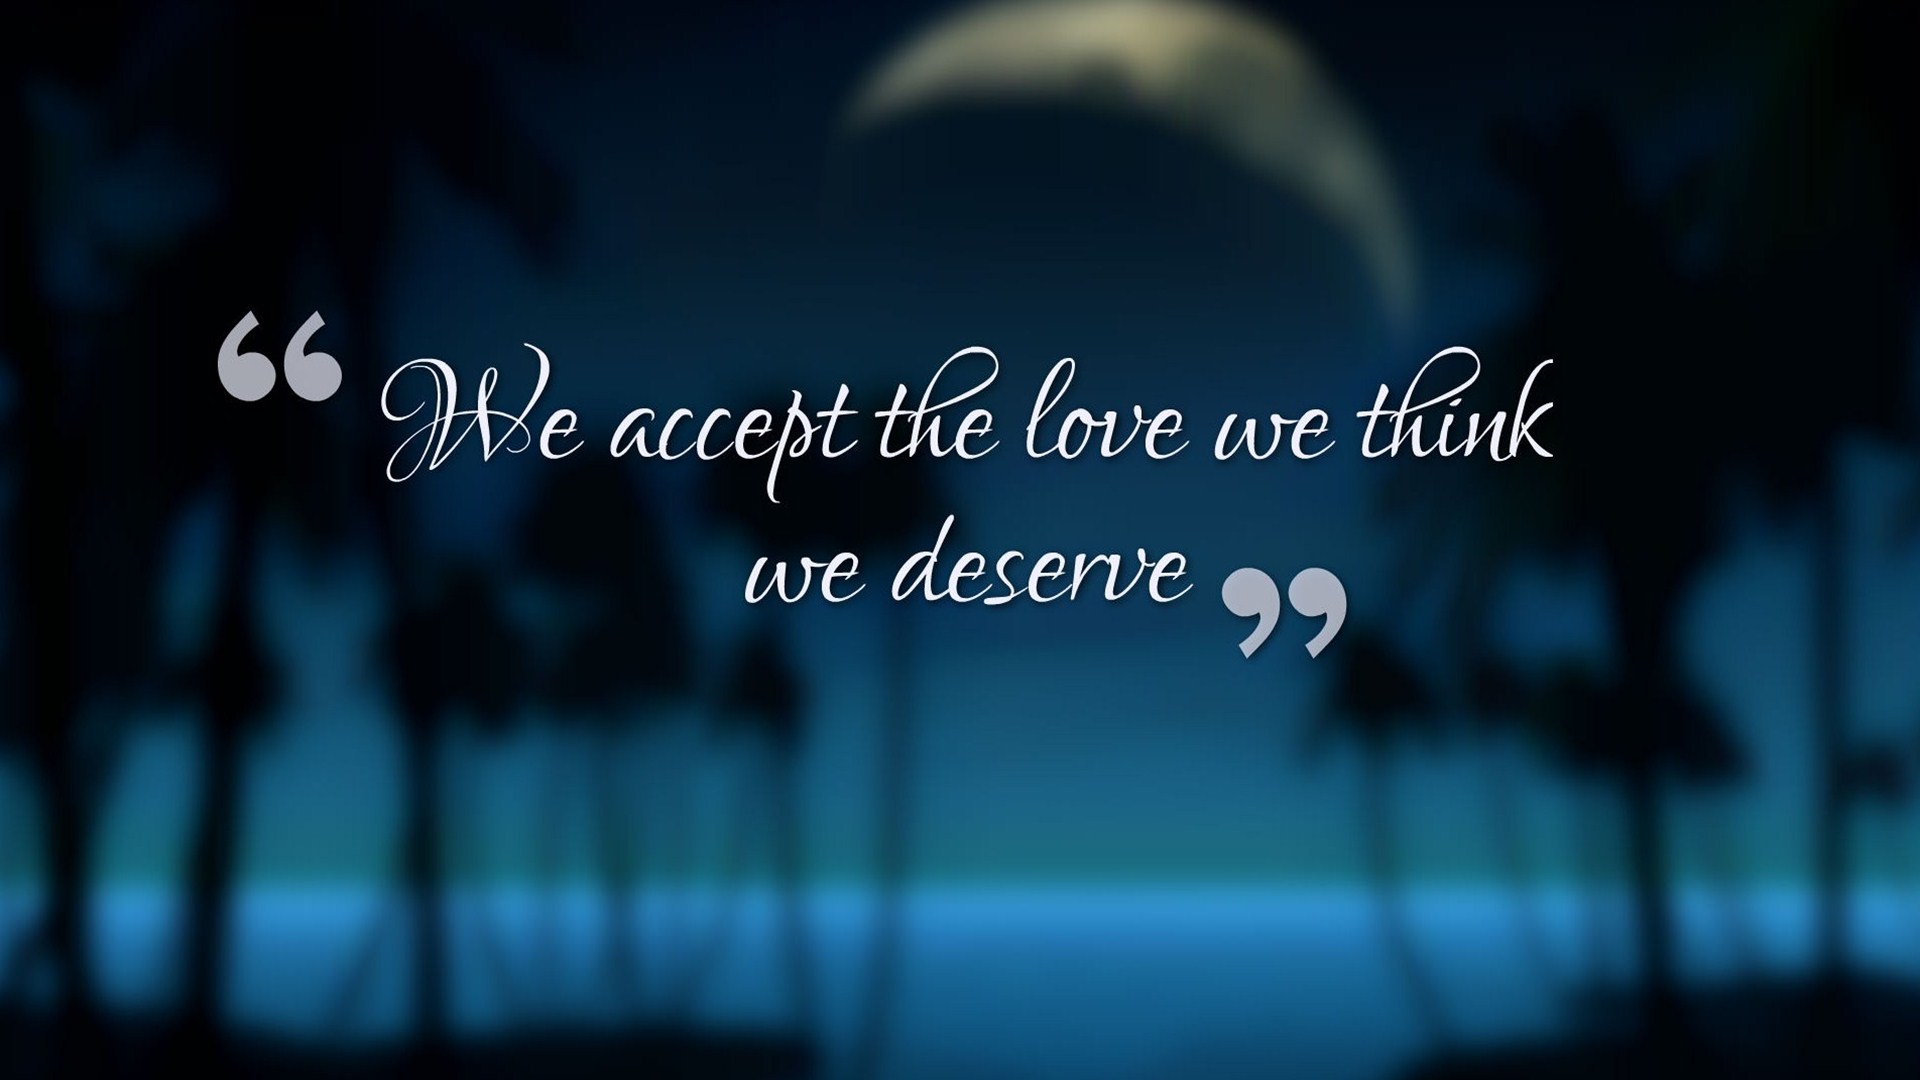 love quotes wallpaper hd,text,sky,blue,font,darkness